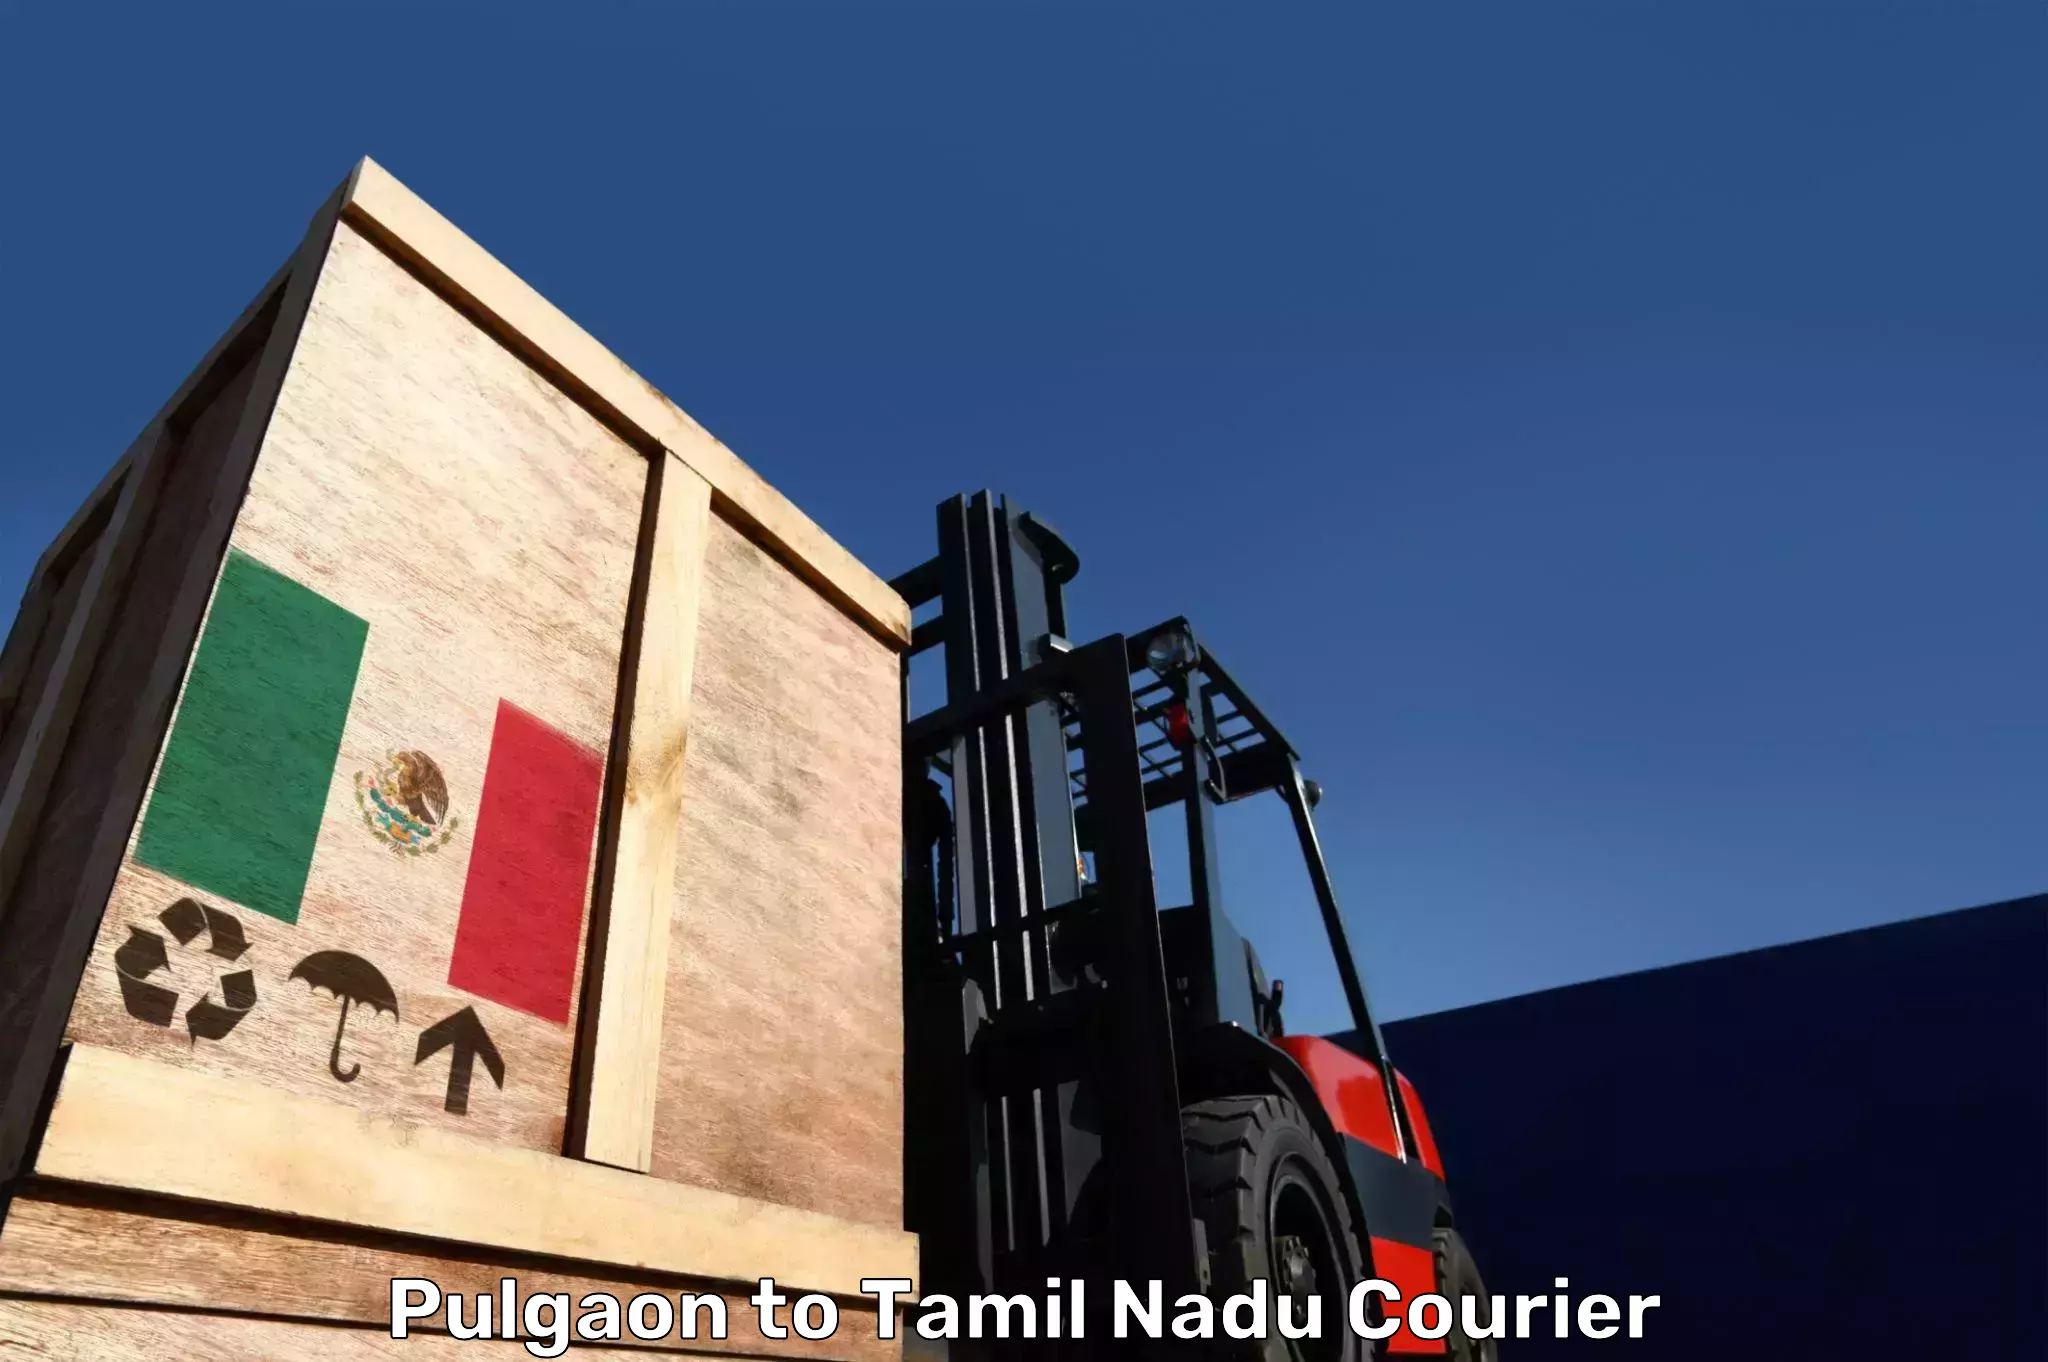 Luggage delivery rates Pulgaon to Tamil Nadu